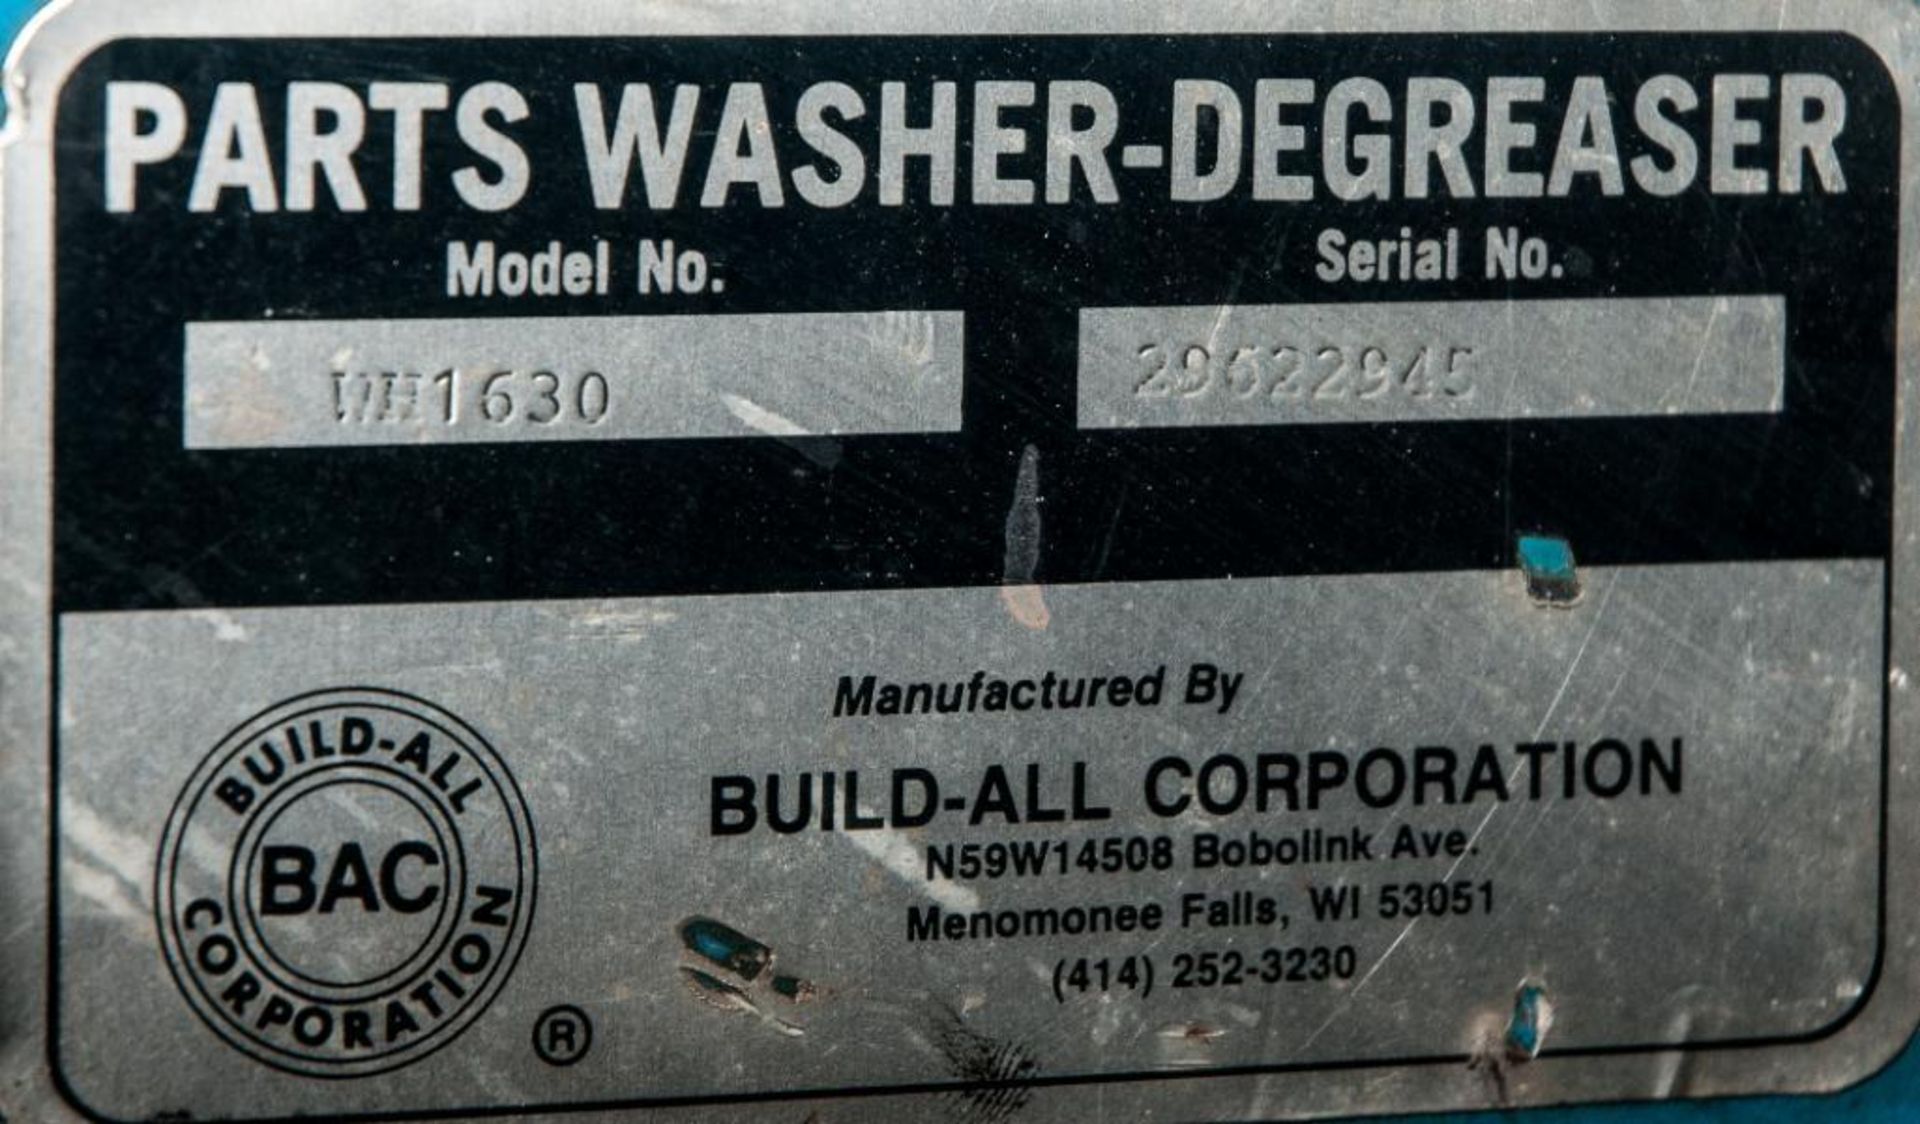 Build-All Corp. Parts Washer, Degreaser, Mdl WH1630, s/n 29622945, with Lighted Lid - Image 2 of 3